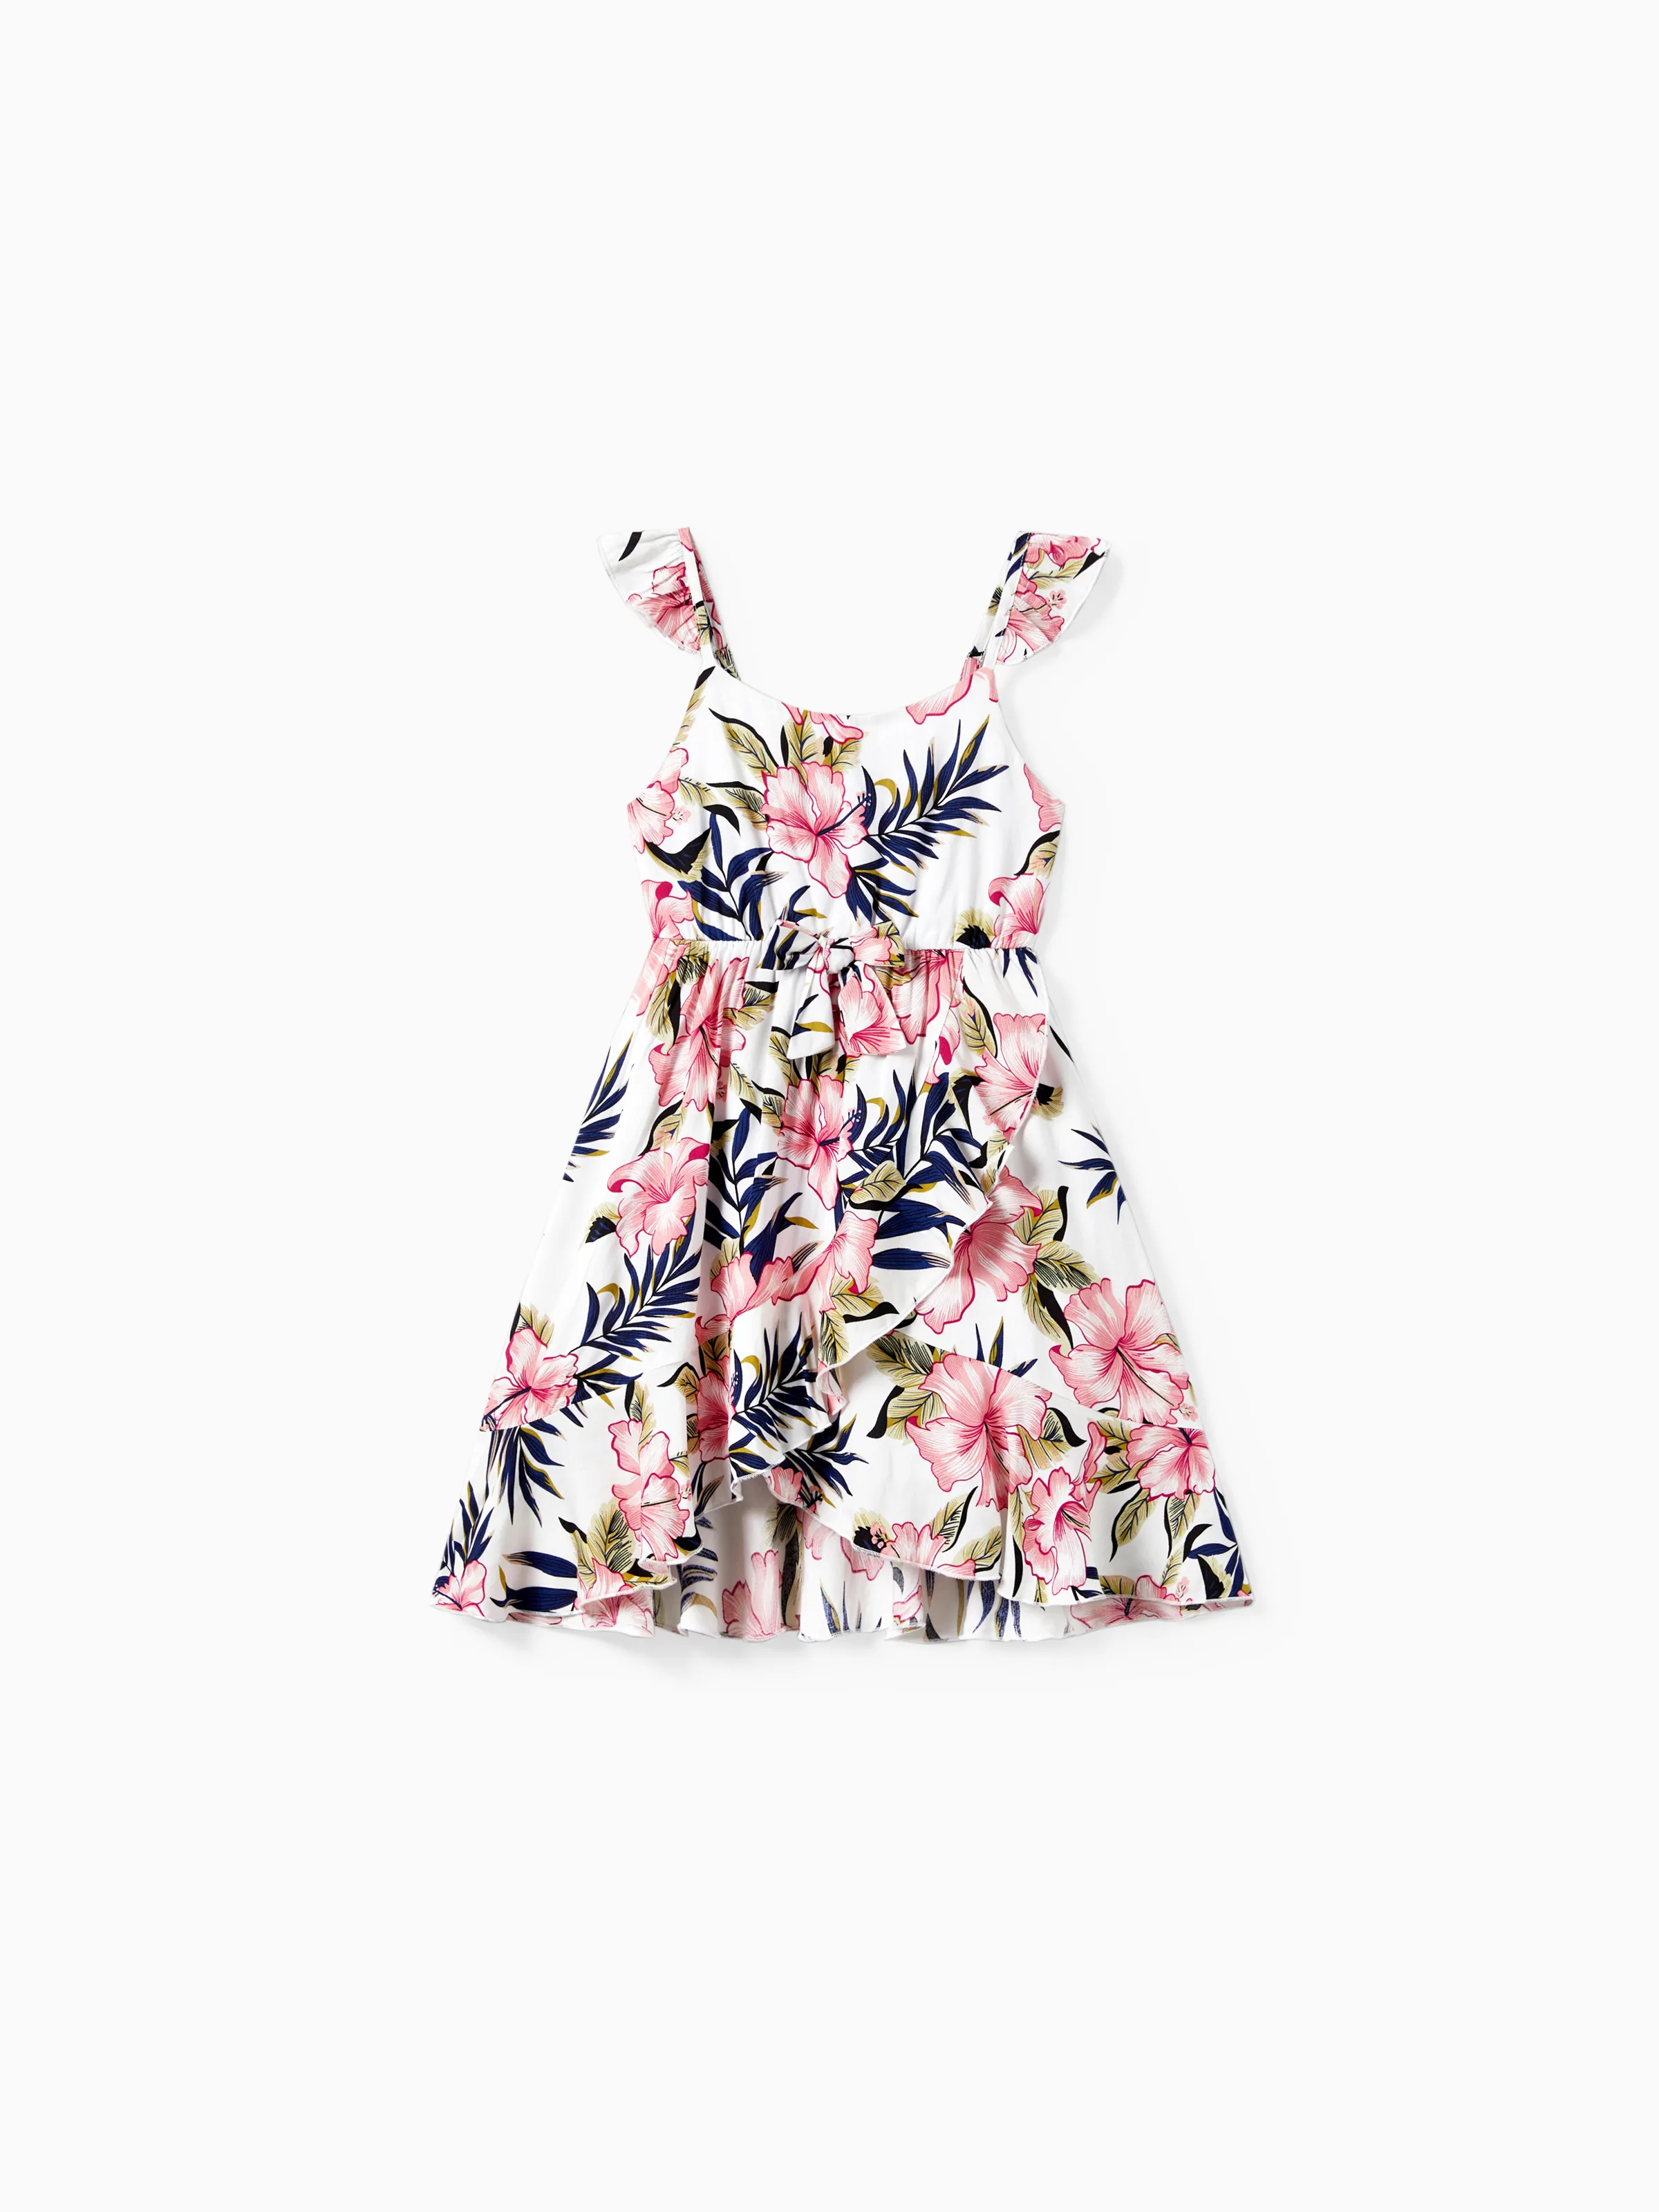 

Family Matching Floral Wrap Bottom Strap Dress and Colorblock T-shirt Sets